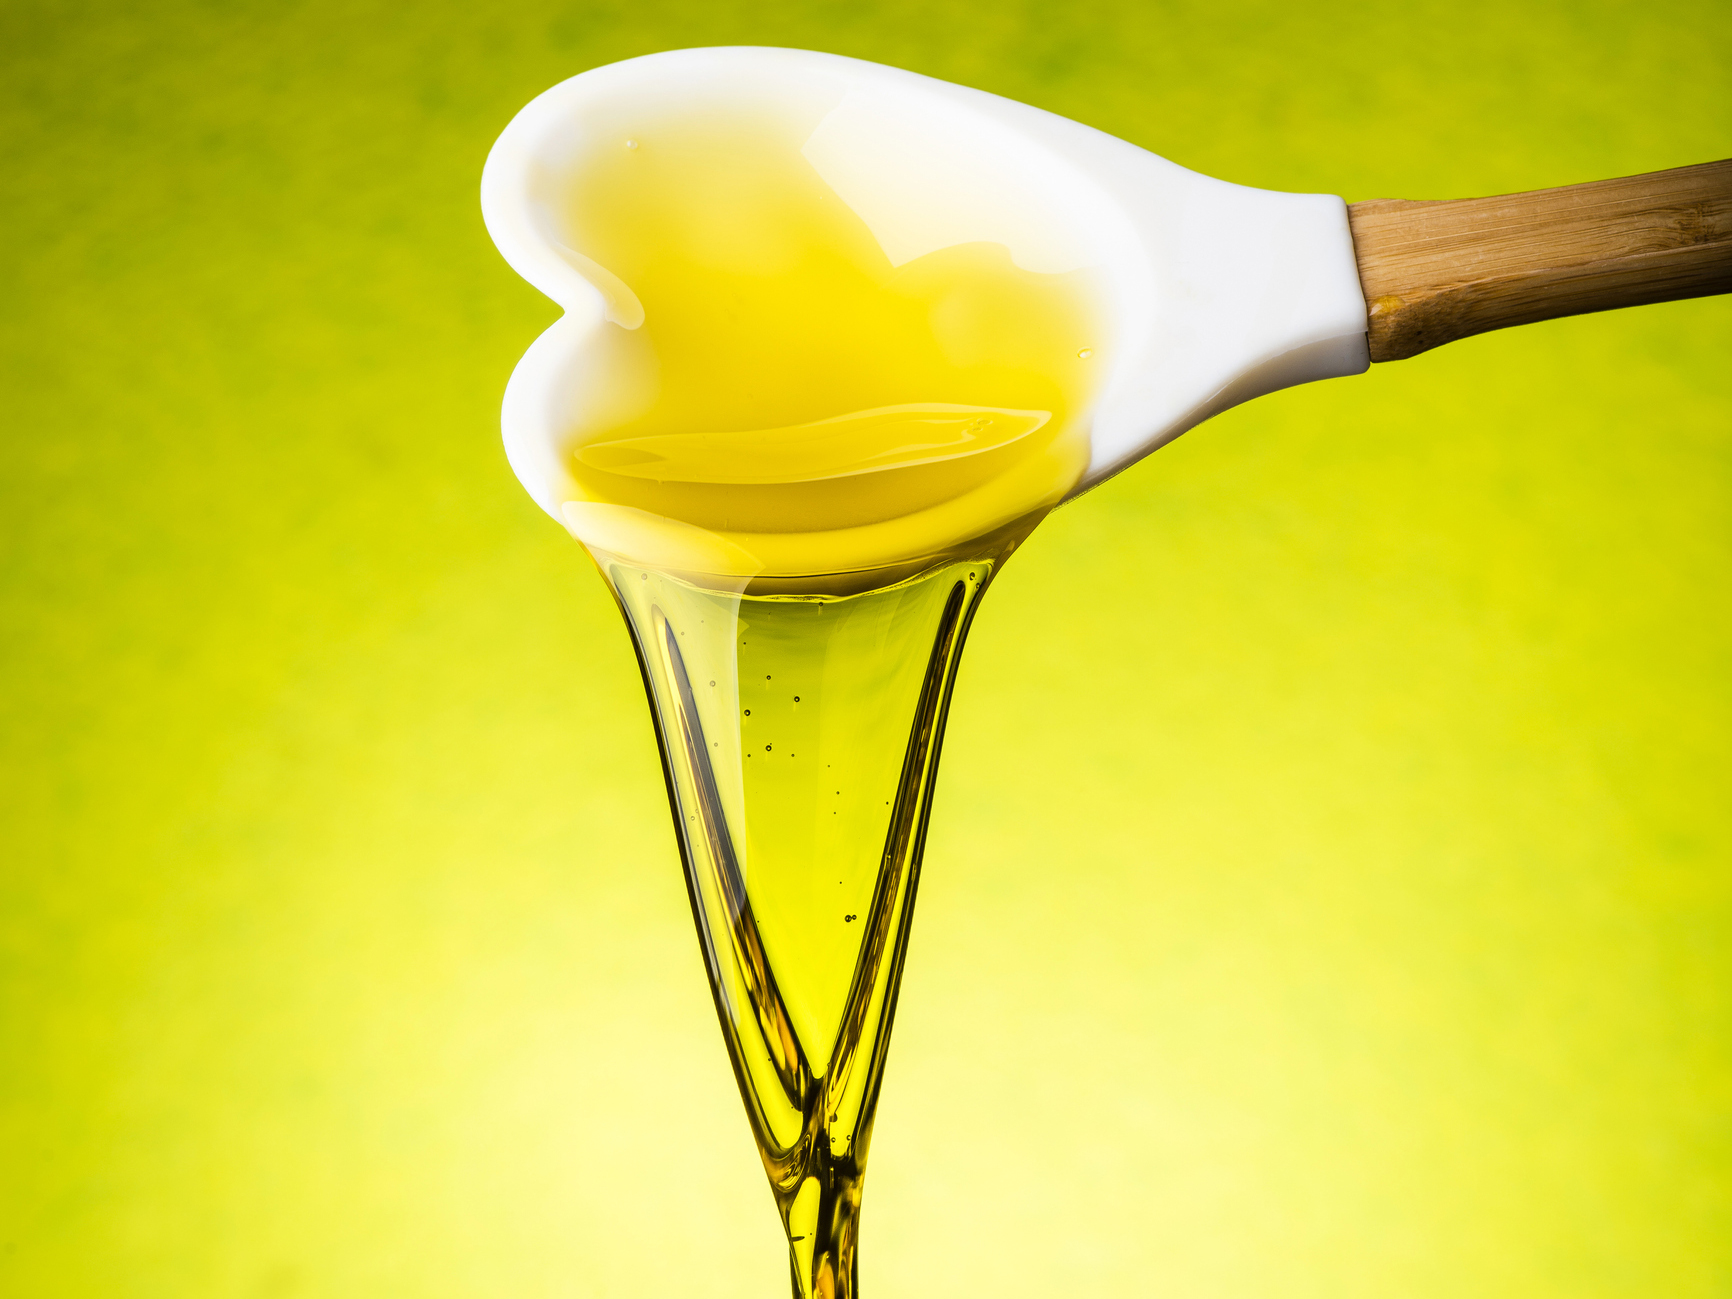 Research confirms: Less butter and more olive oil lowers your heart disease risk